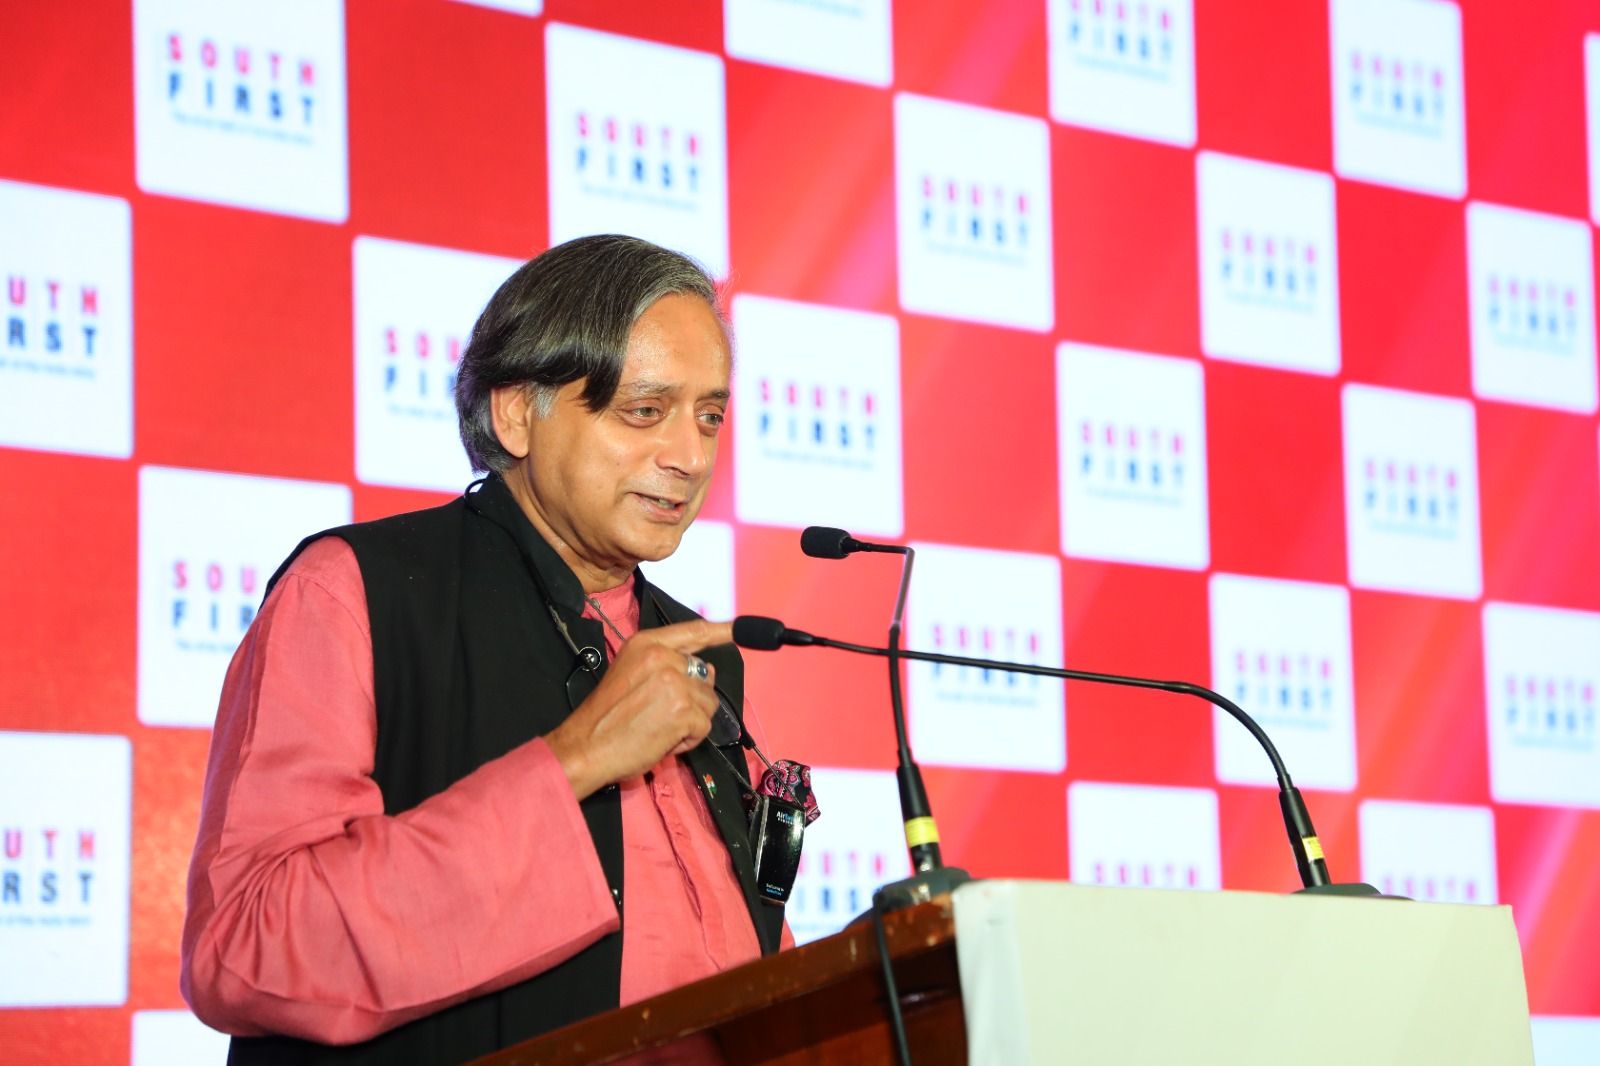 Shashi Tharoor to be conferred with the Le’gion d’honneur by French government